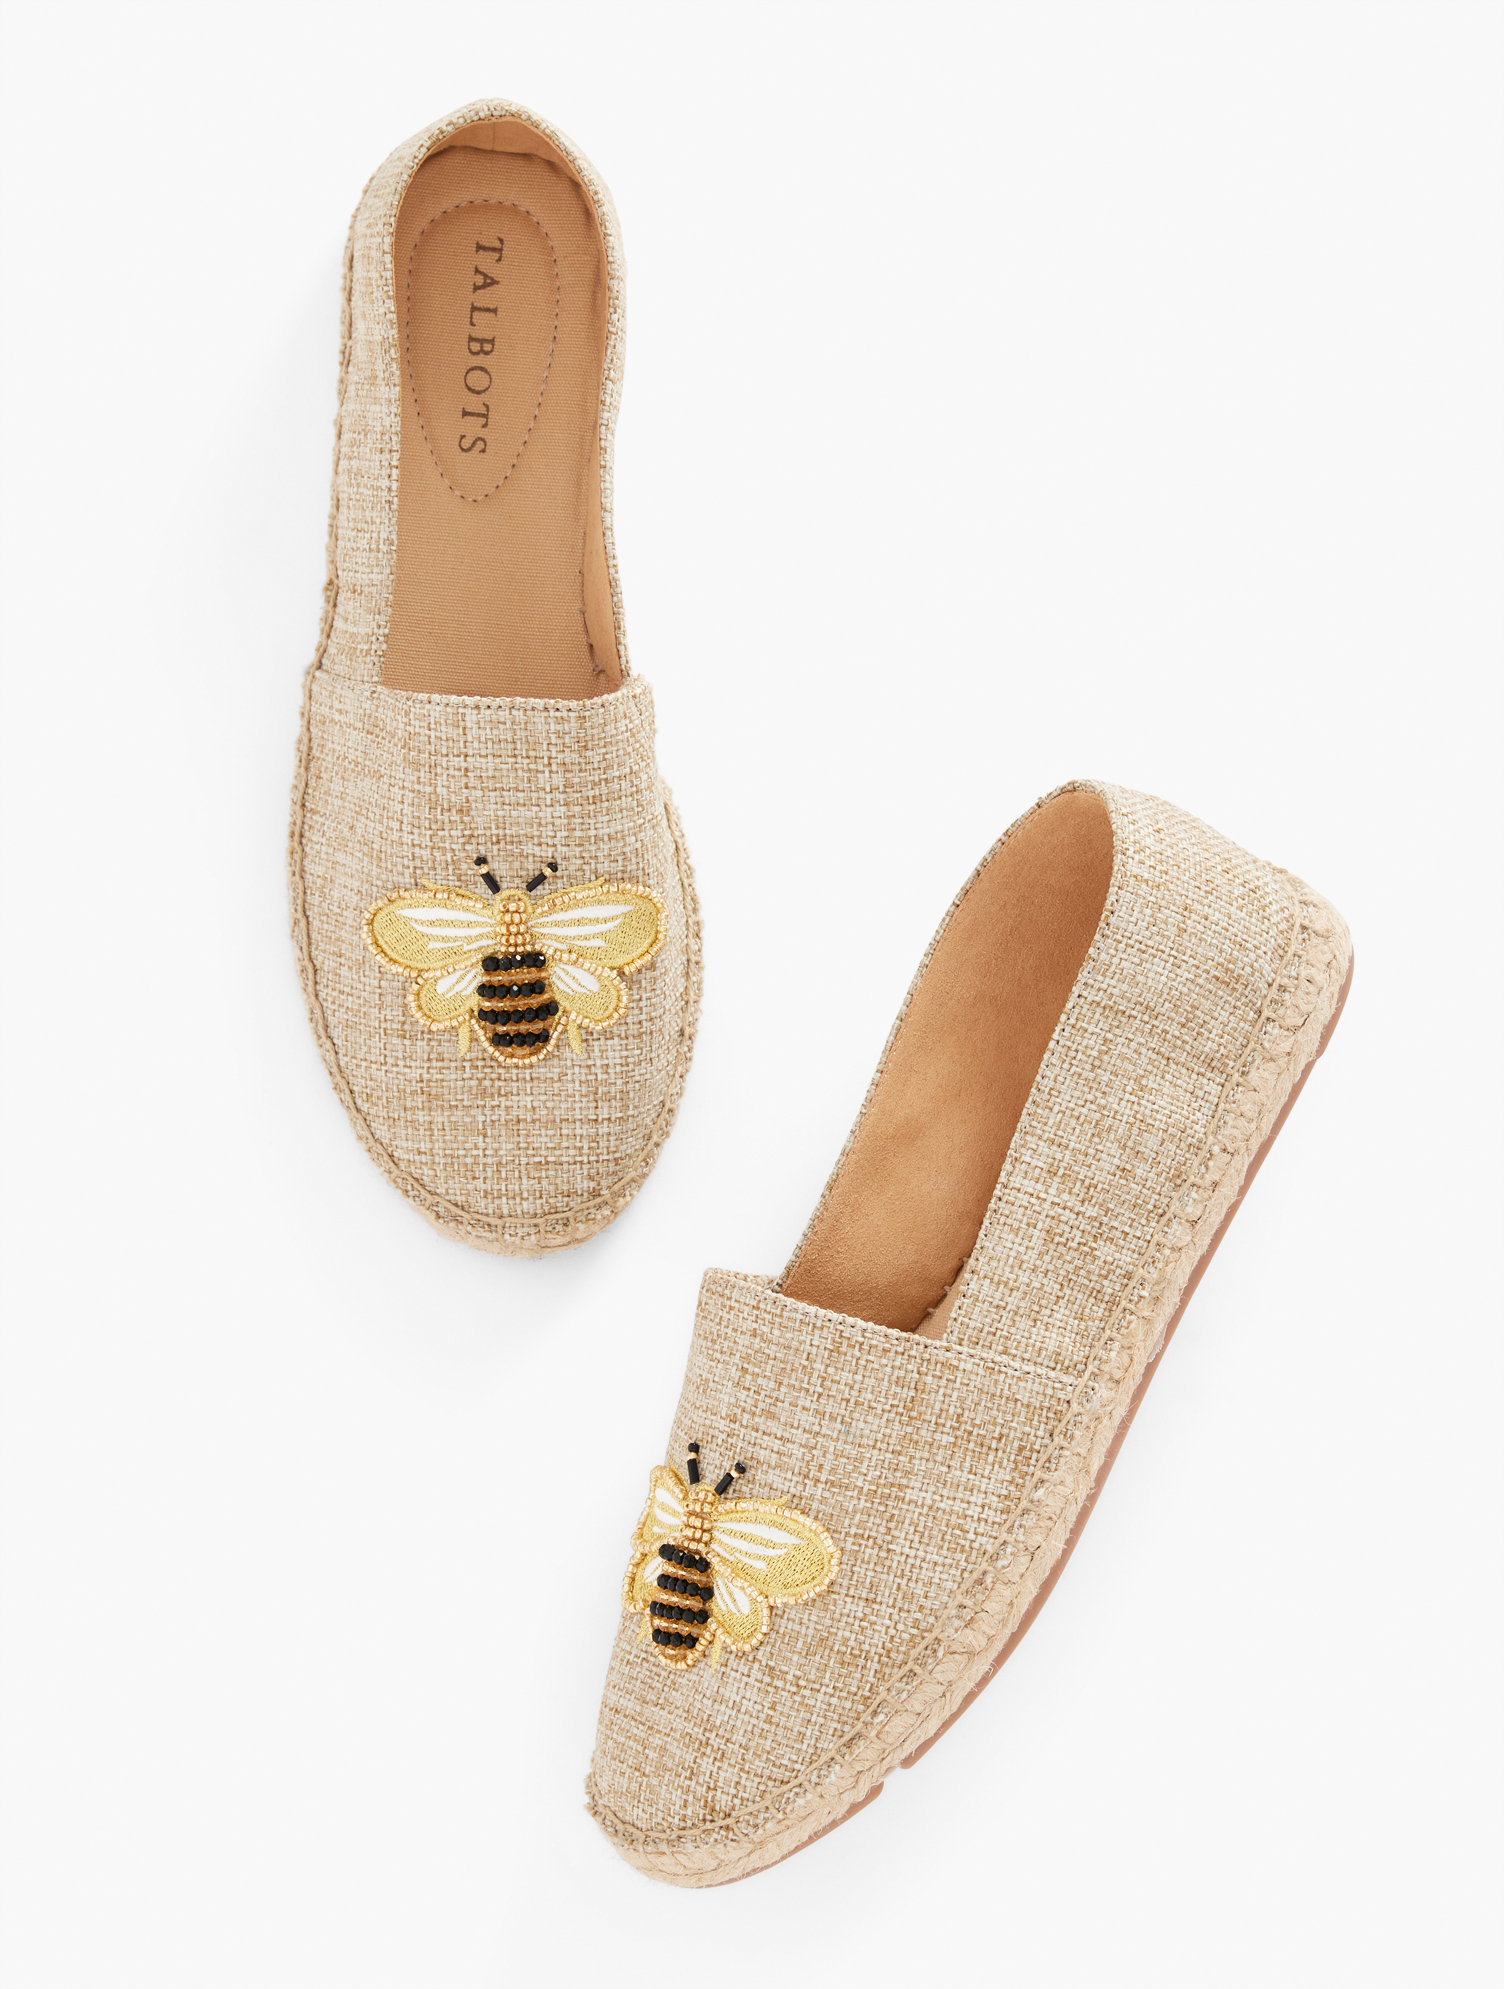 Talbots Izzy Espadrille Flats - Beaded Bee - Natural - 8 1/2 M - 100% Cotton